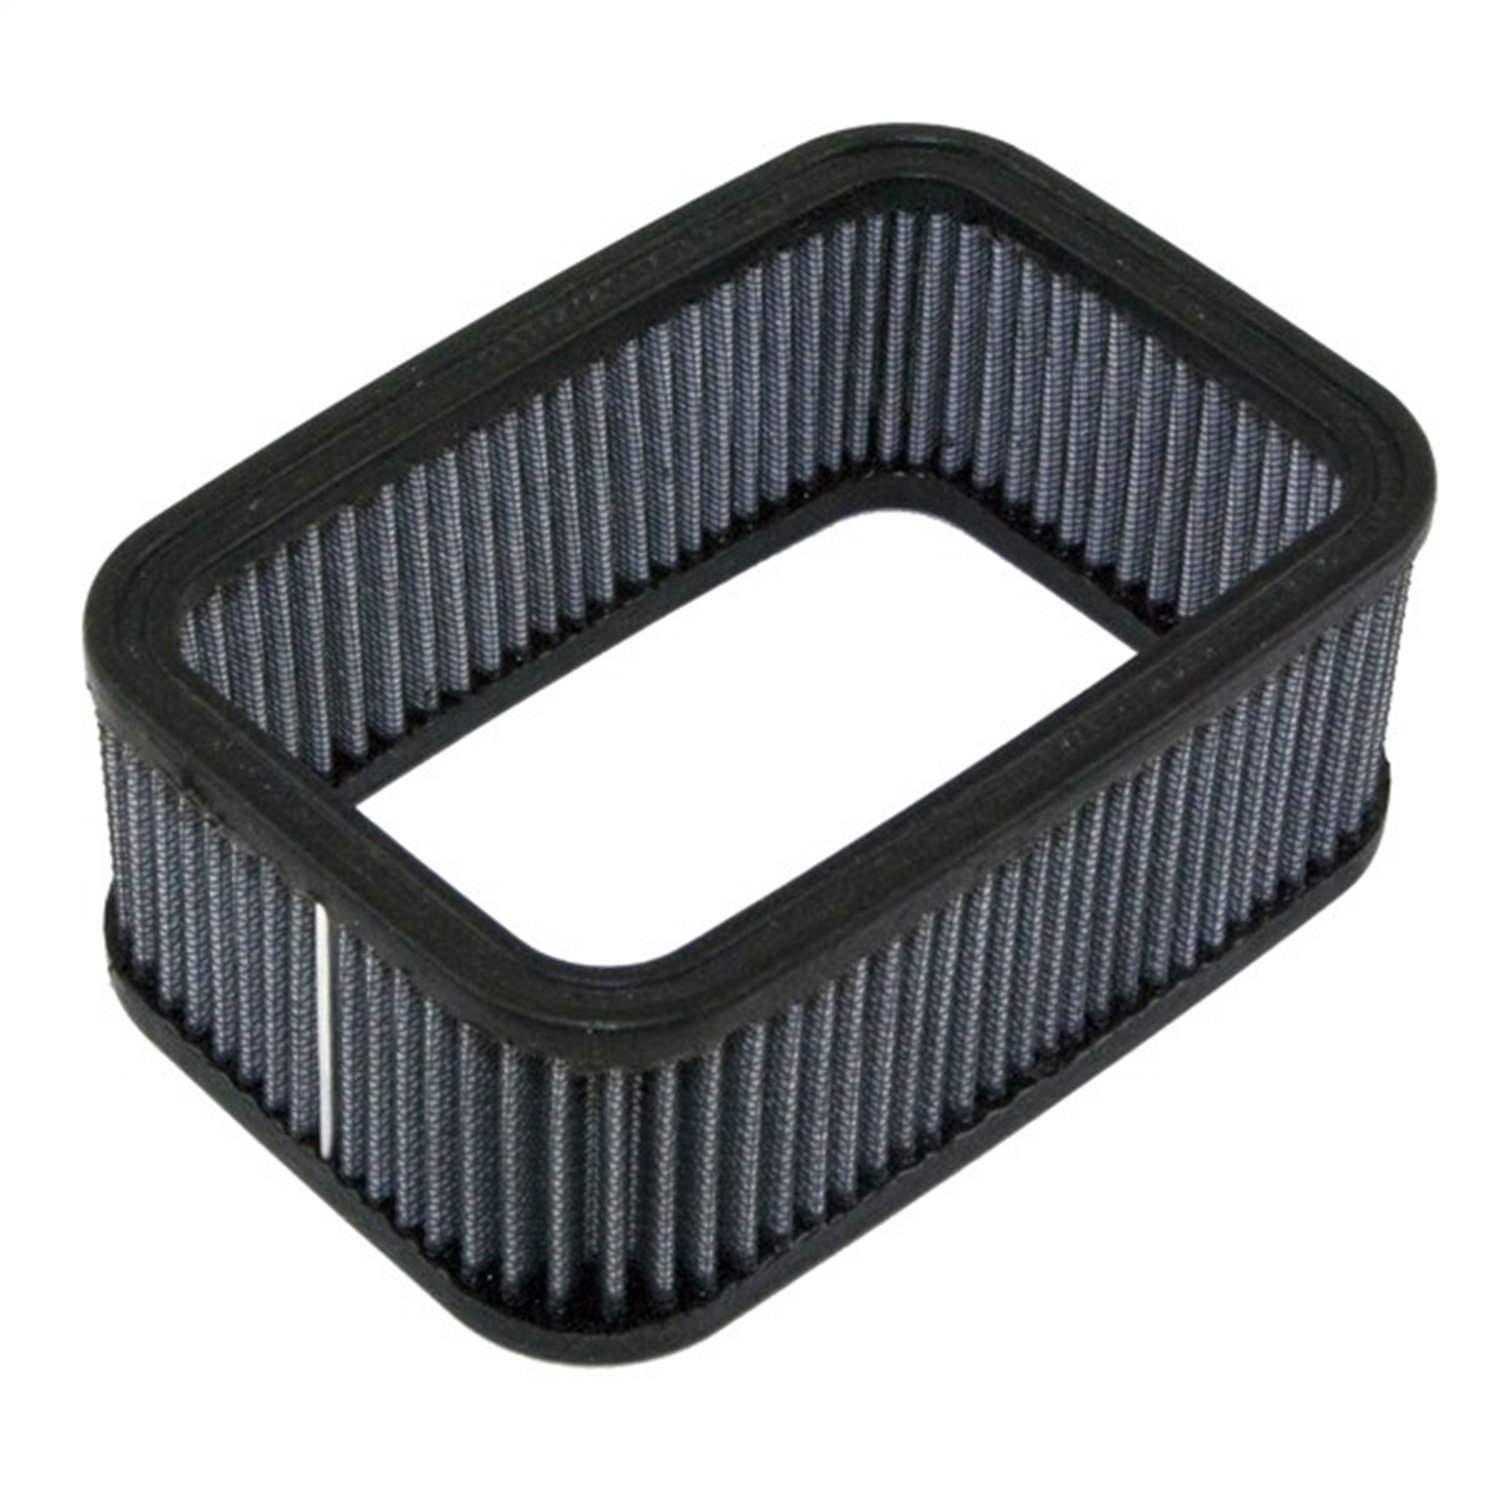 This 2.5 inch tall replacement air filter fits Weber carburetors 17702.01 17702.02 17702.03 17702.04